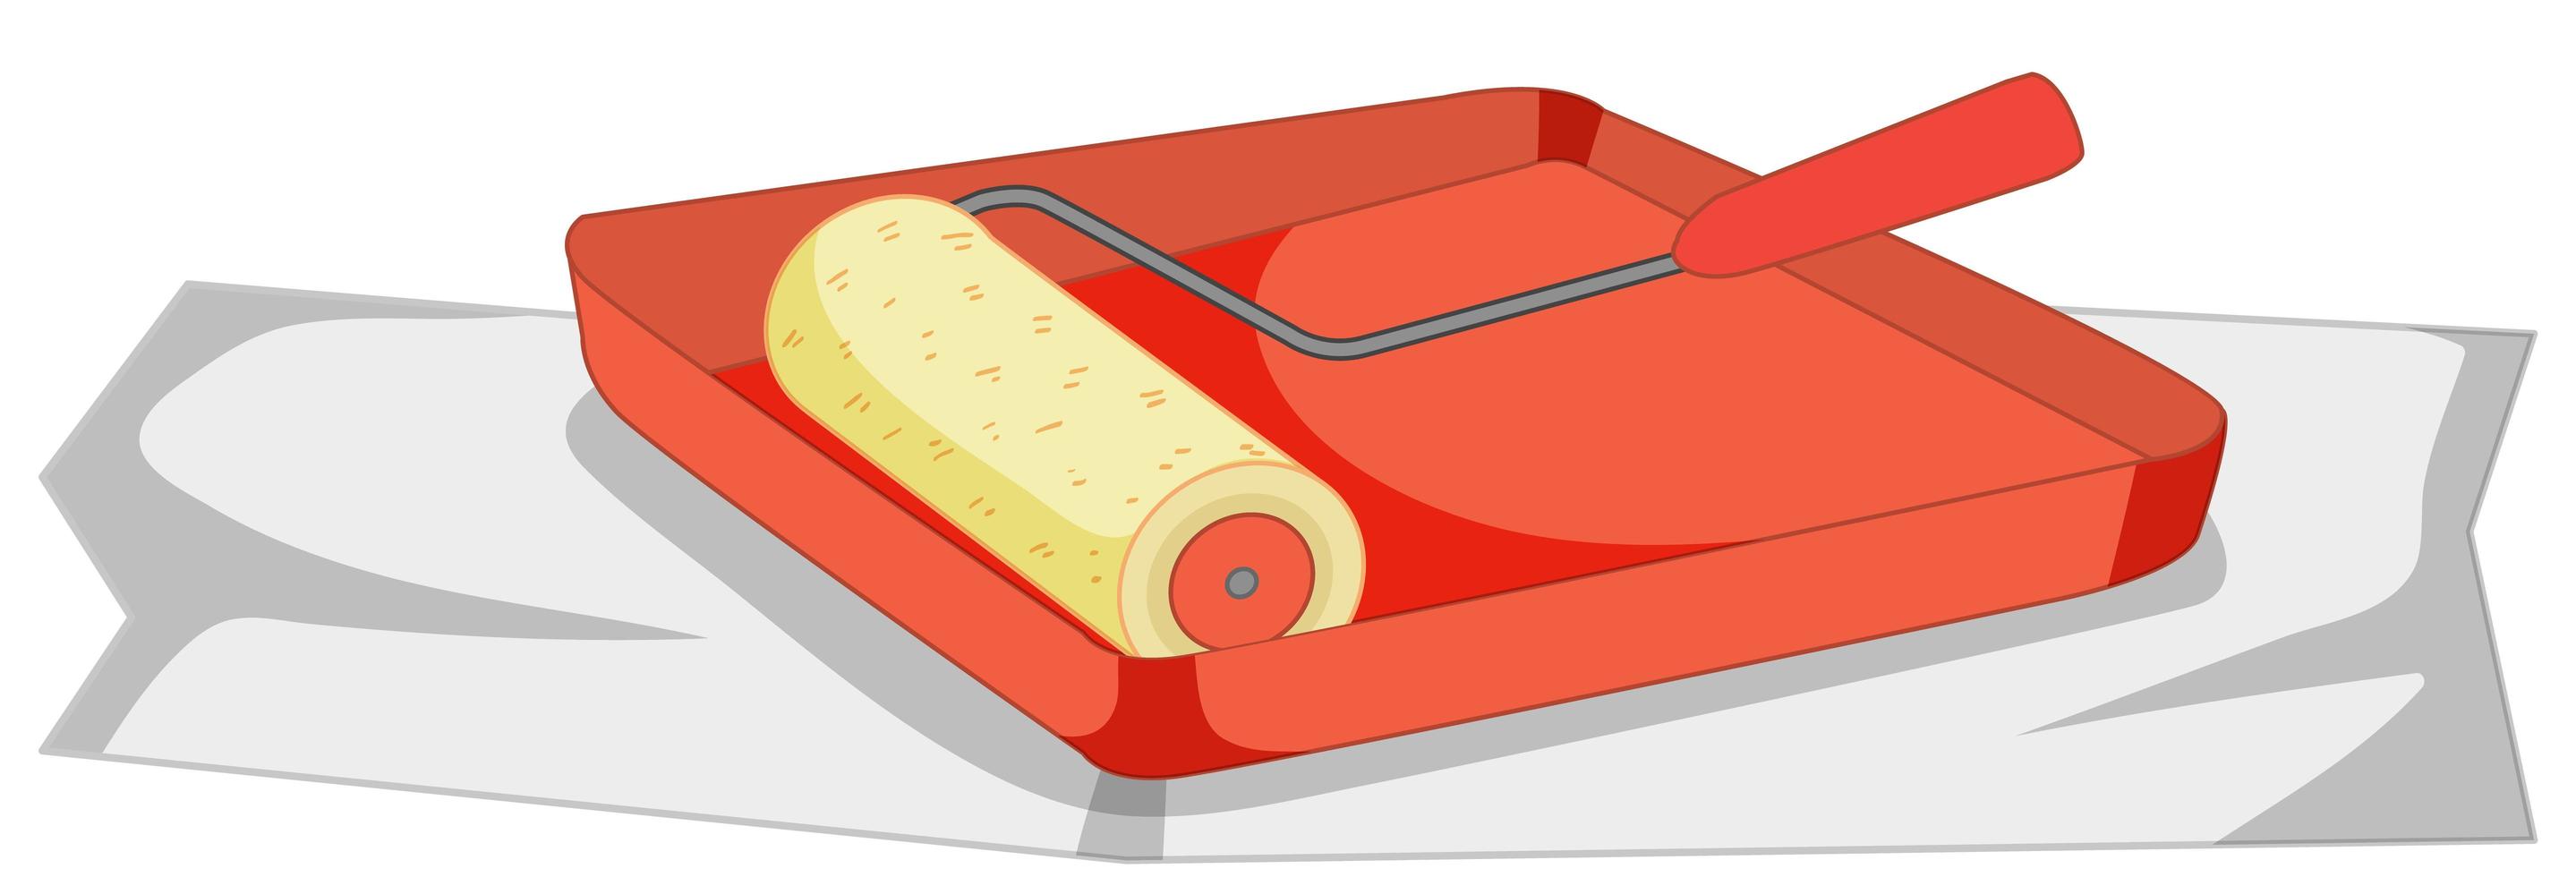 Paint roller with paint tray for painting work vector